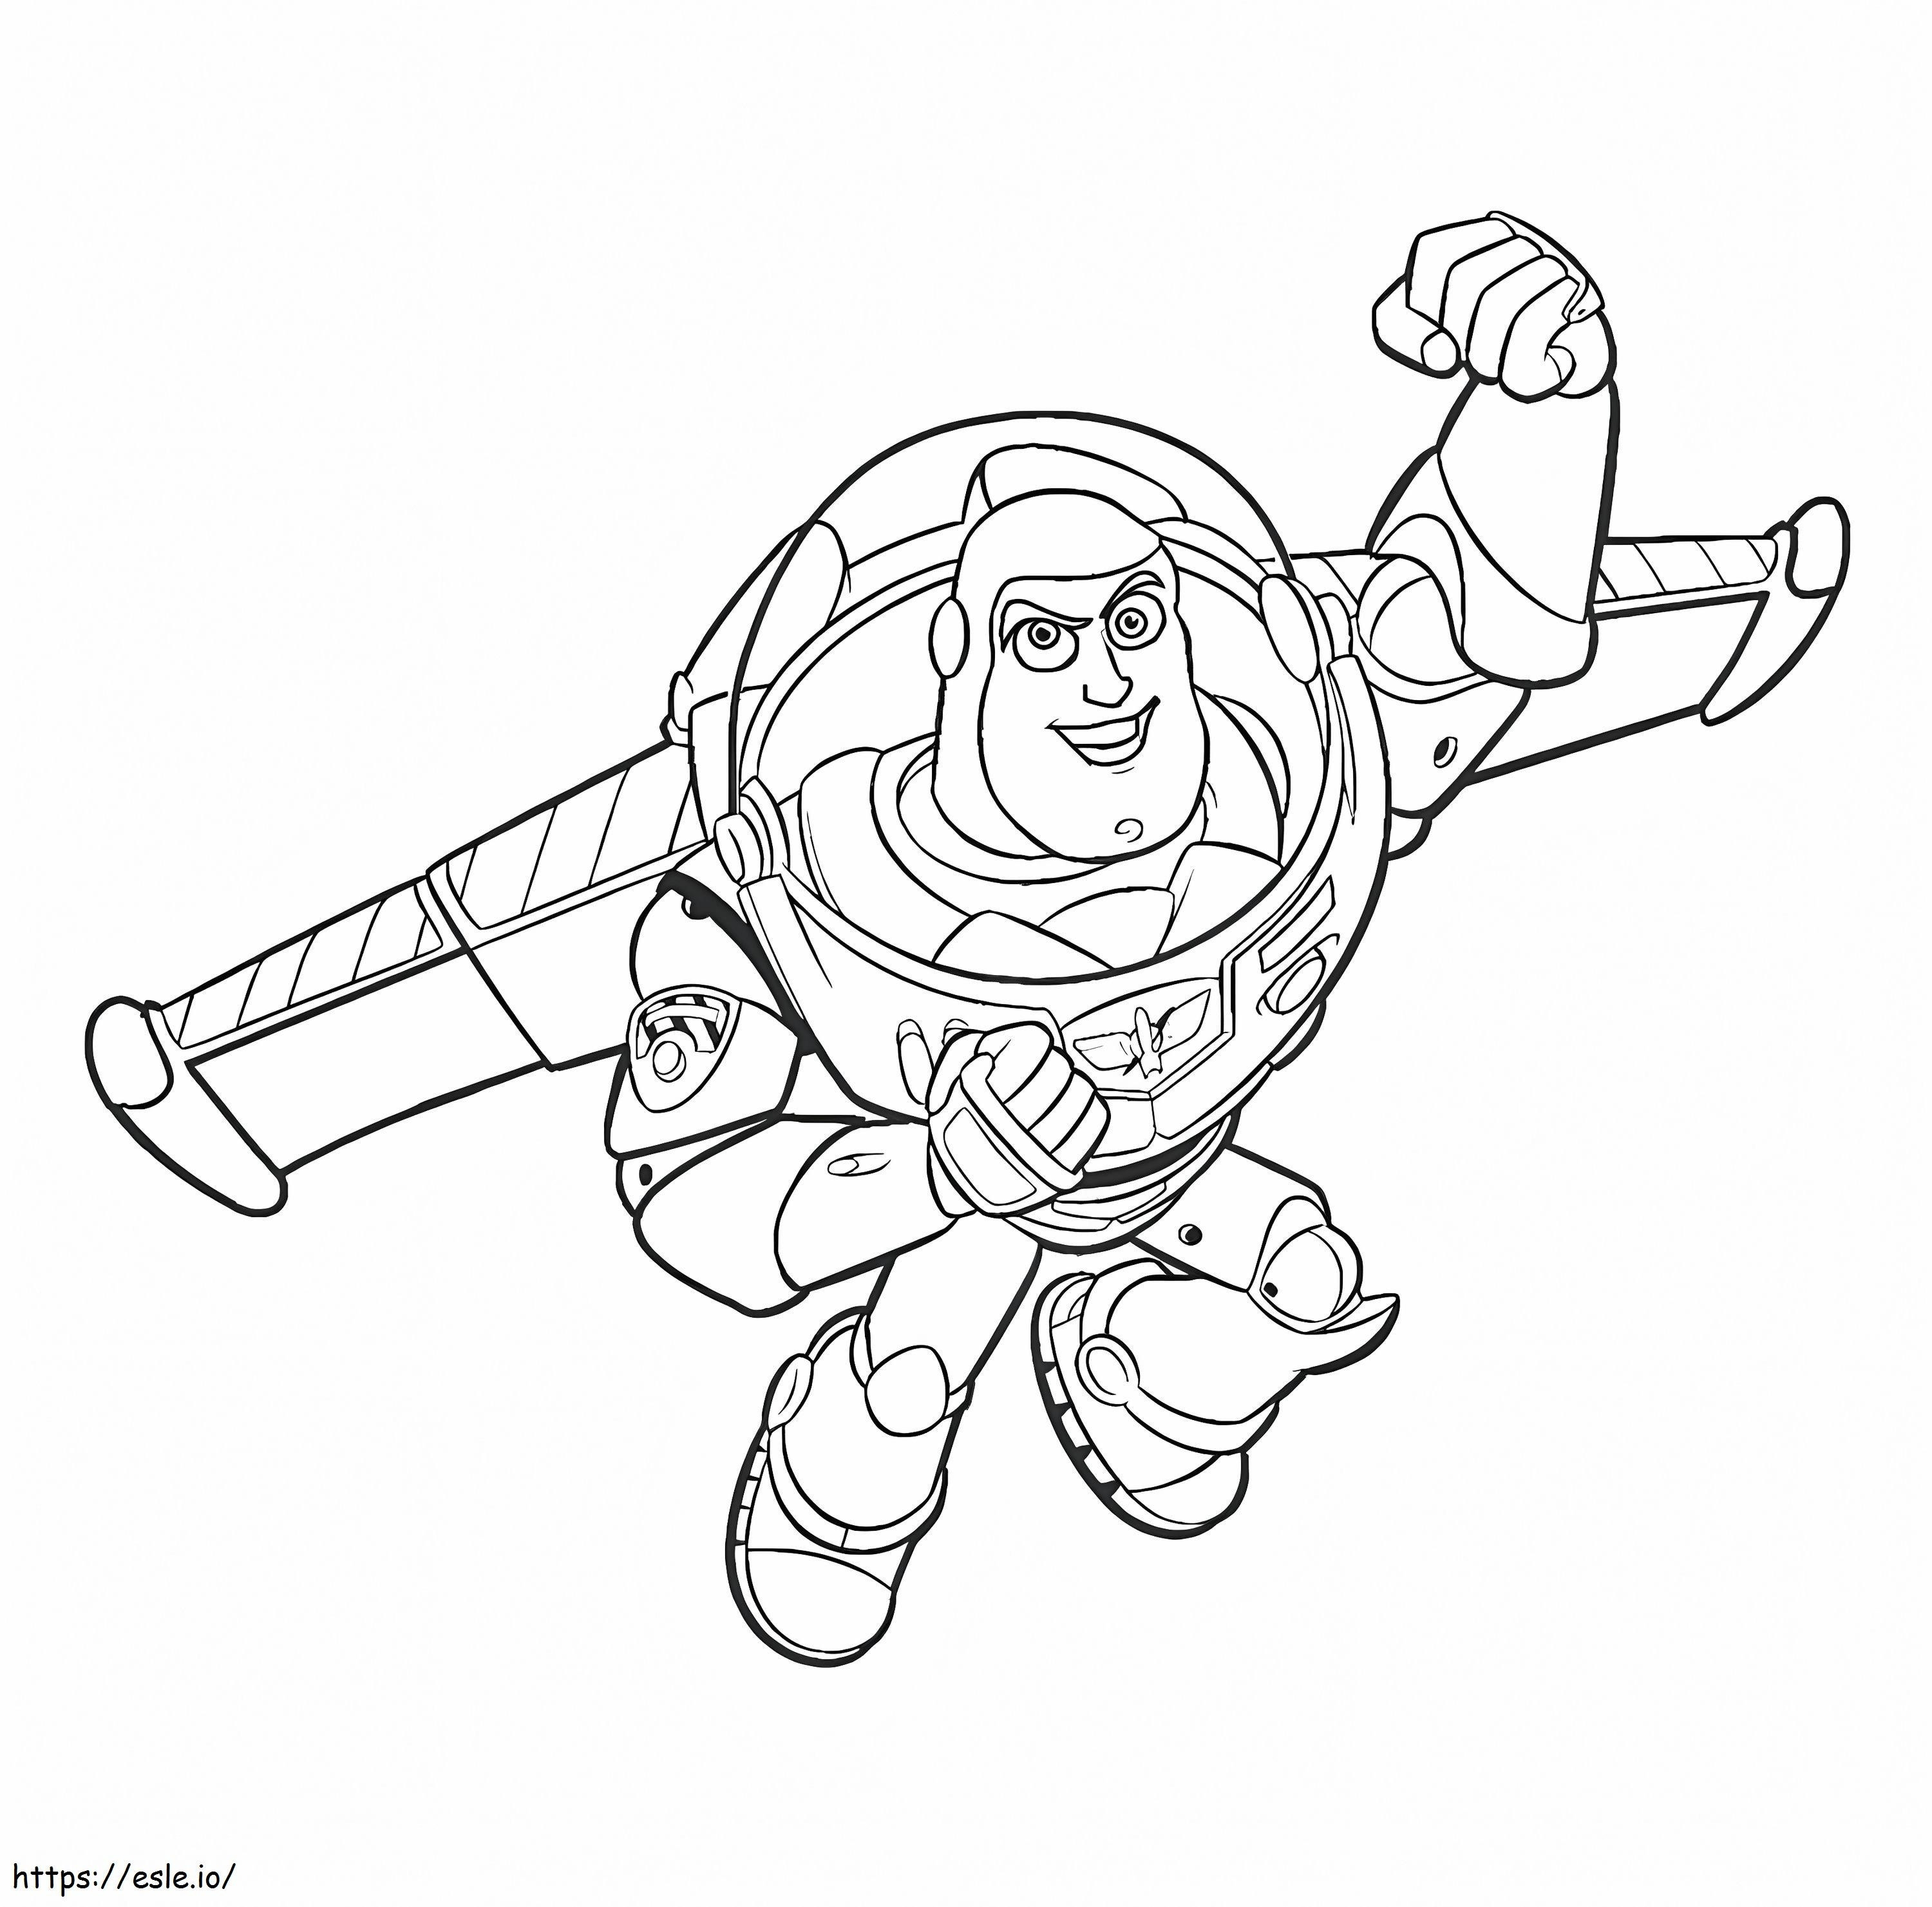 Flying Buzz Lightyear And Punch coloring page